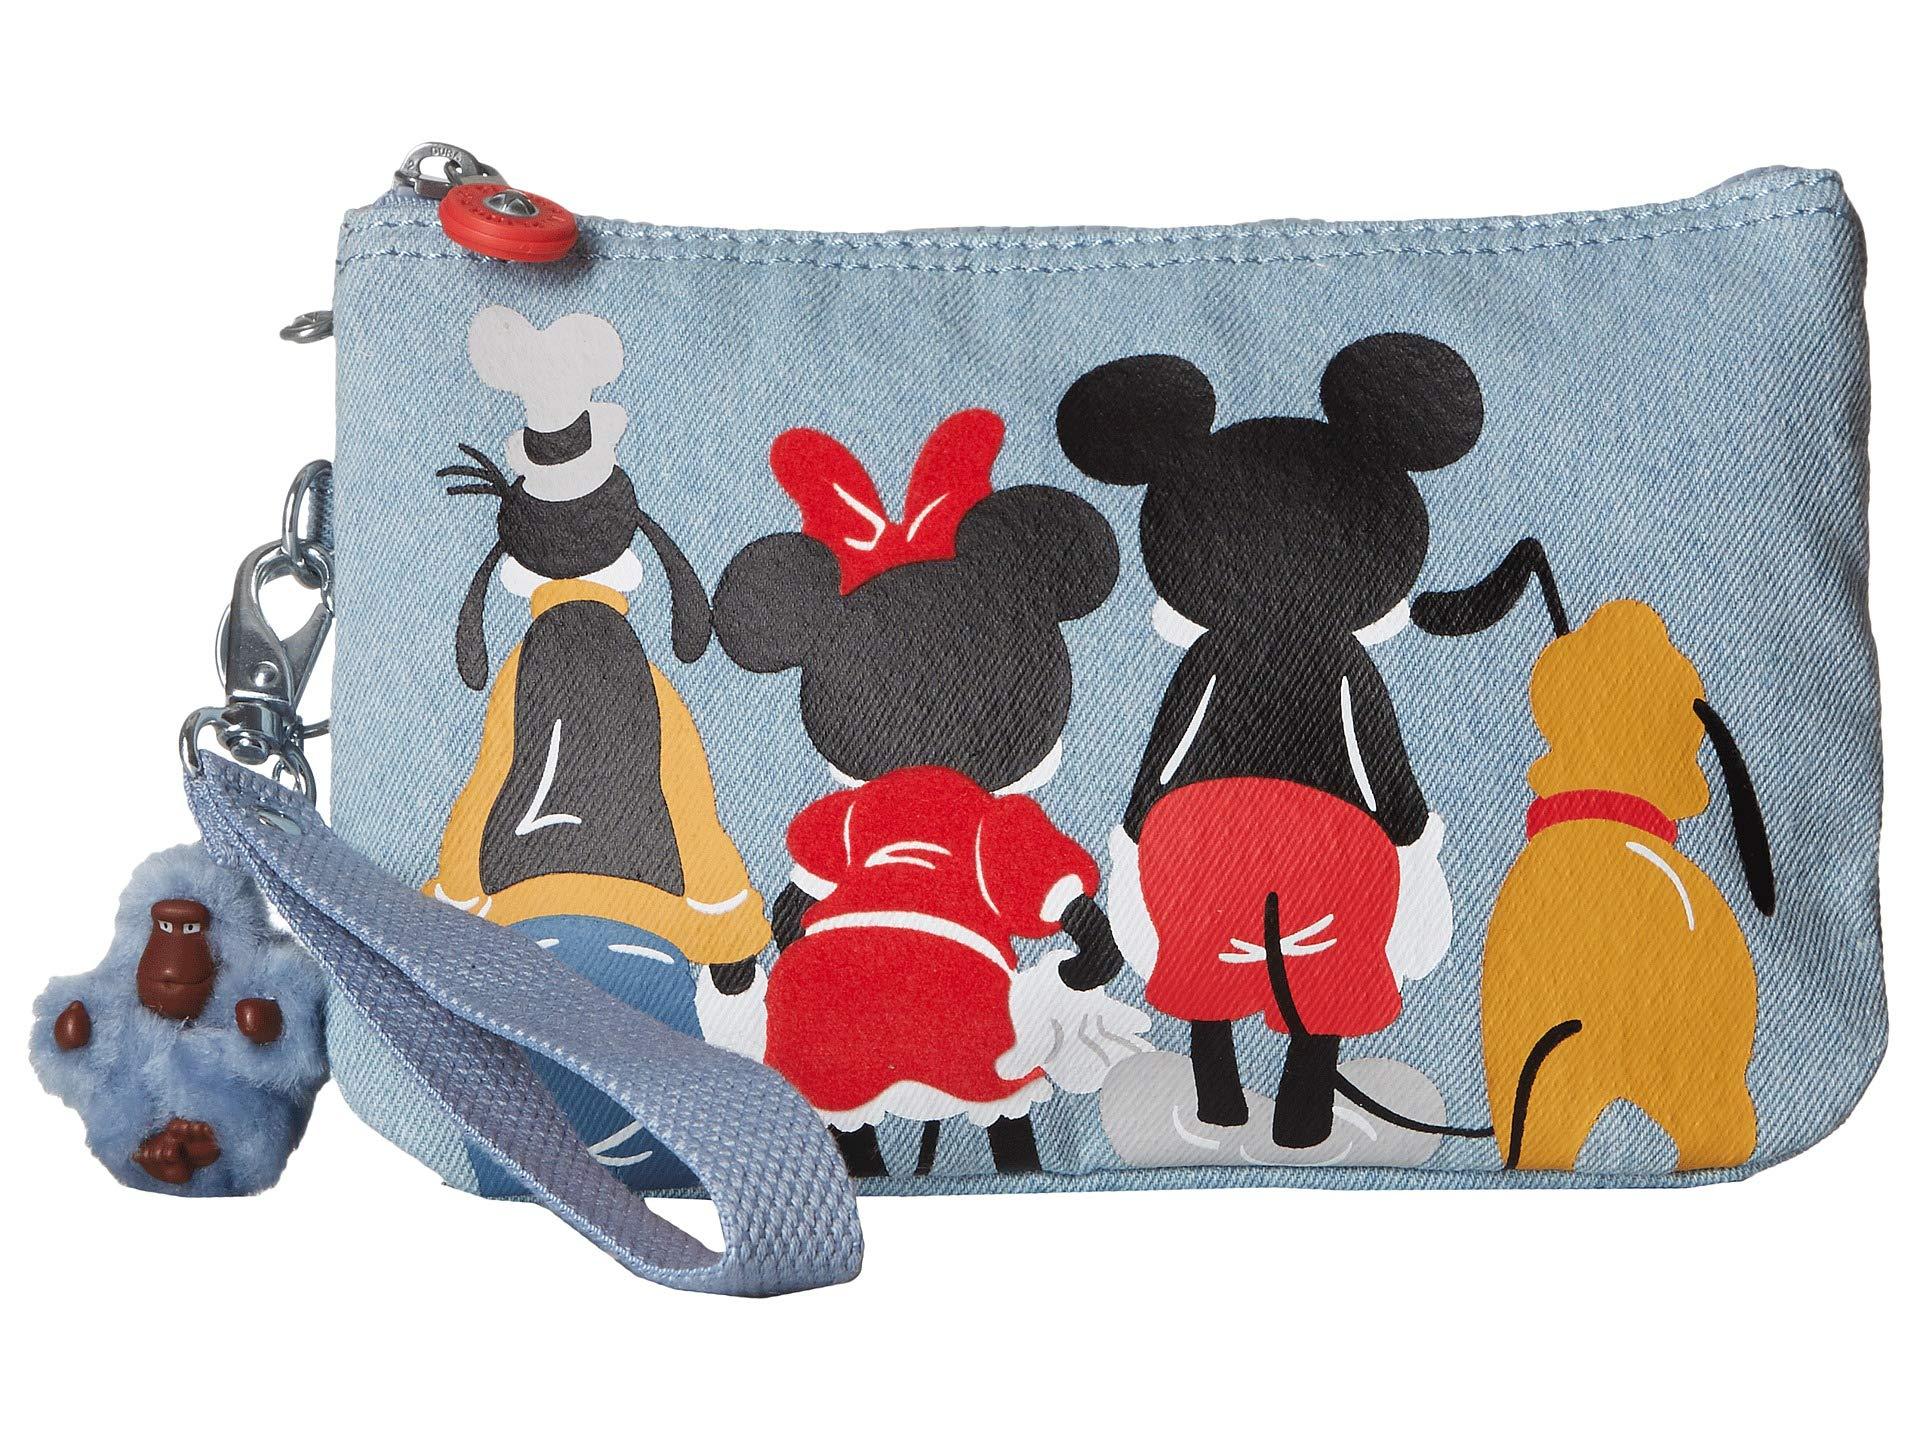 Kipling Disney Mickey Mouse Creativity Xl Pouch (simply Love) Luggage in  Blue - Lyst